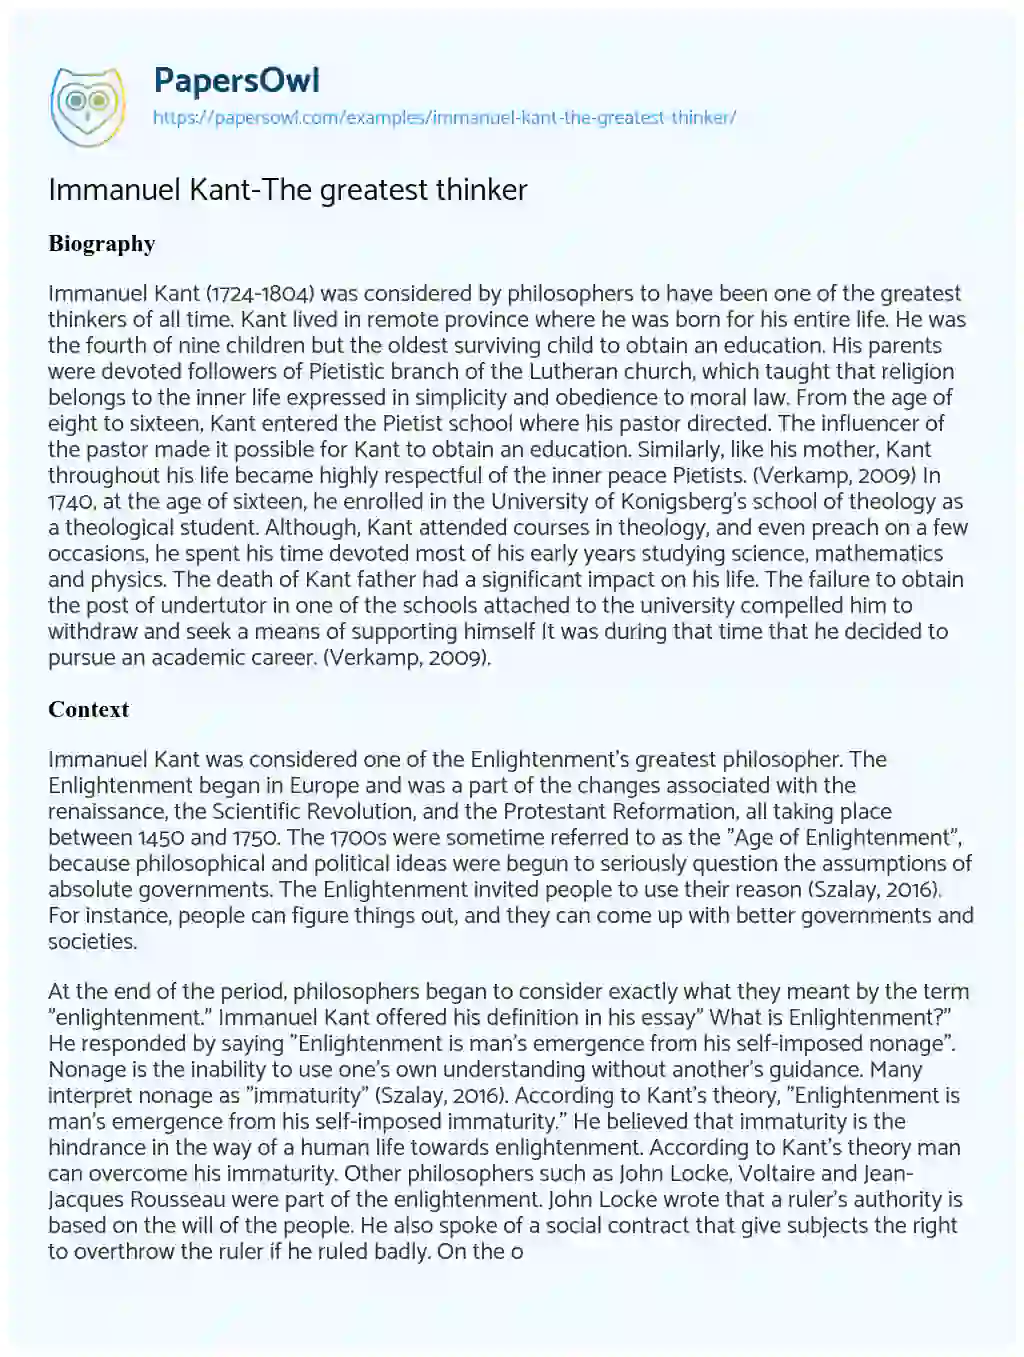 Essay on Immanuel Kant-The Greatest Thinker